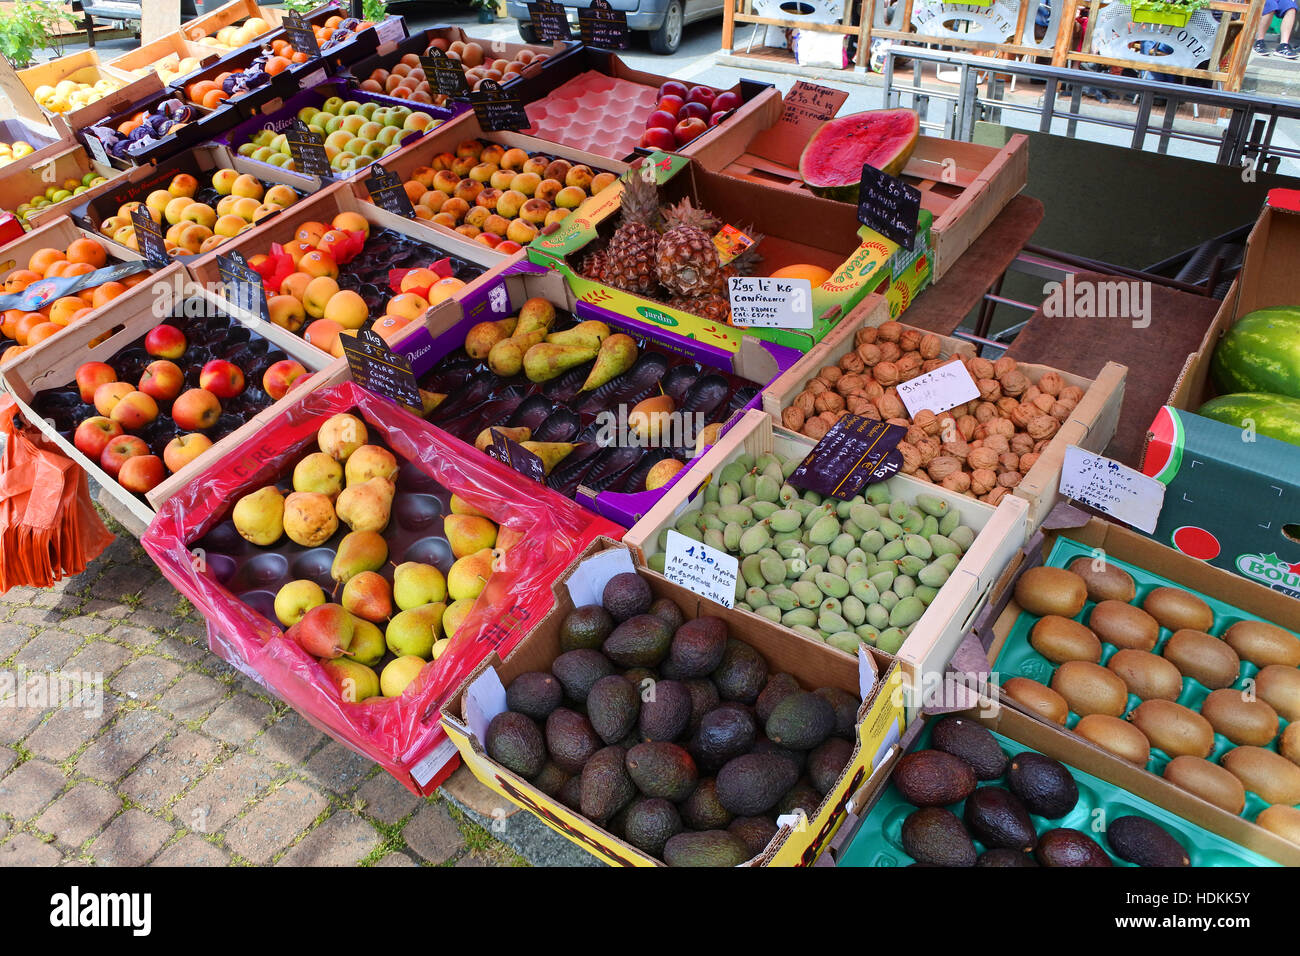 Fruit and vegetable stall - John Gollop Stock Photo